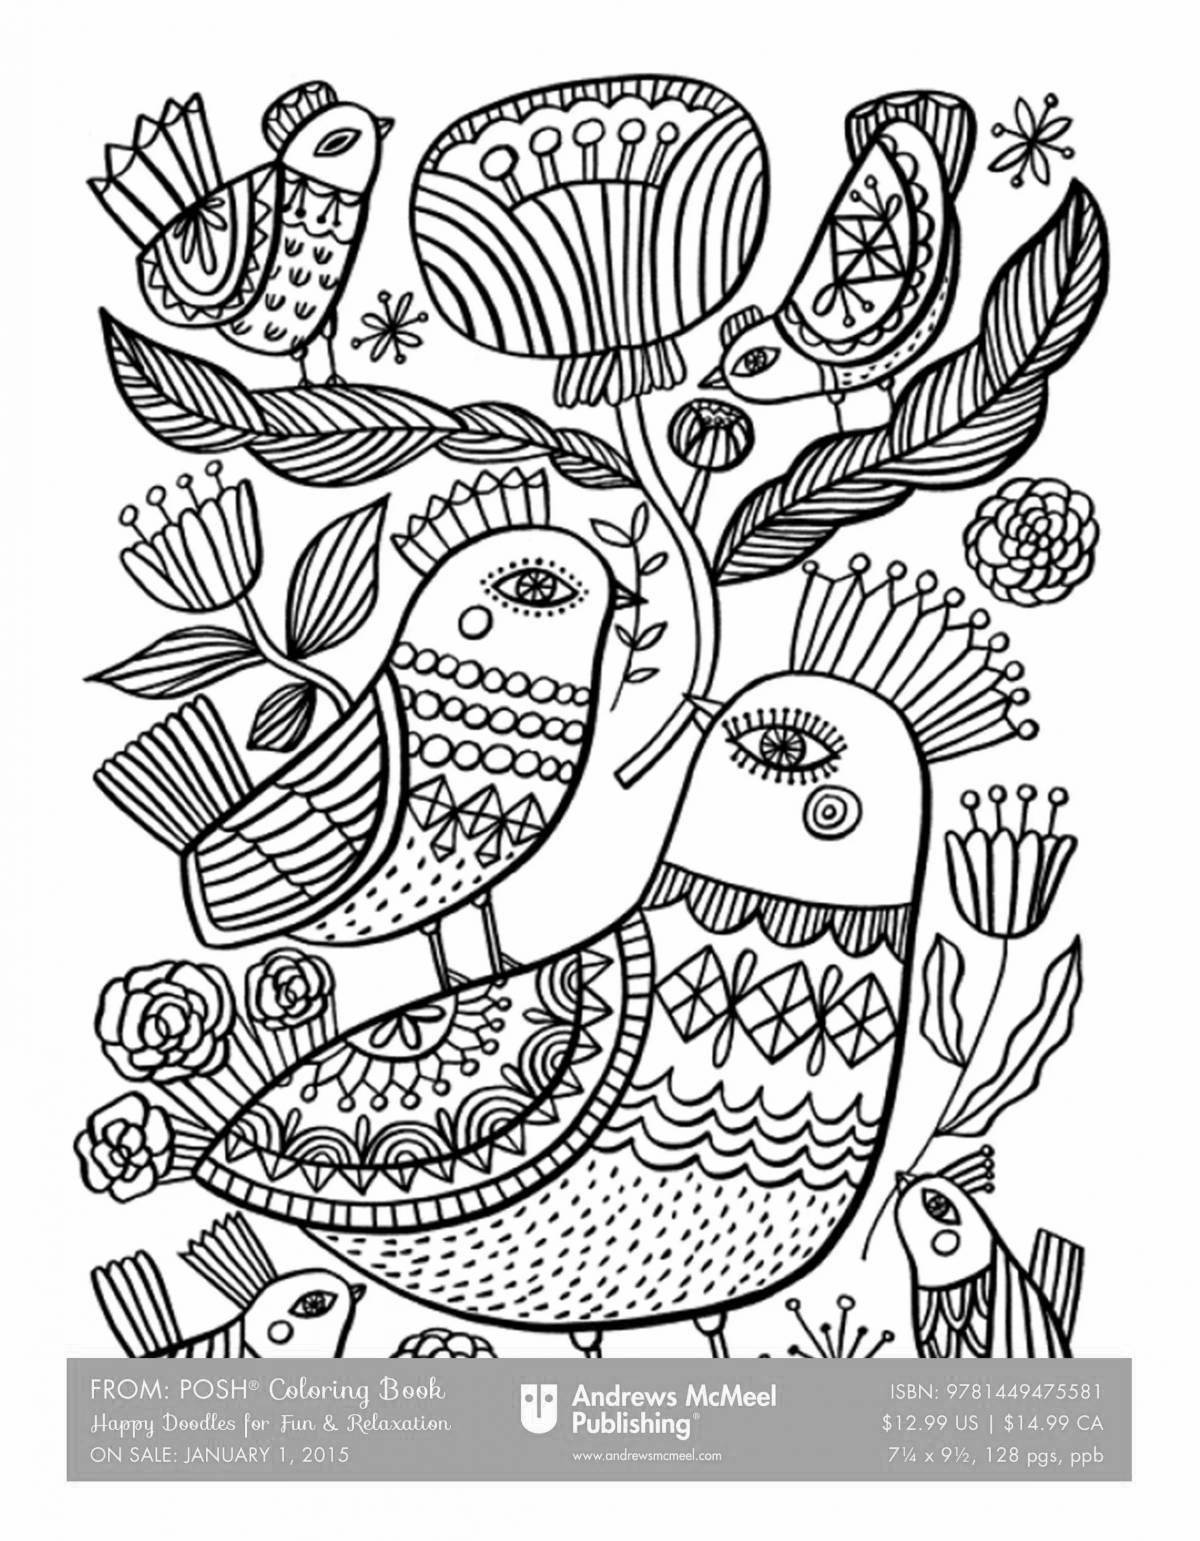 Blissful relaxation coloring book for kids